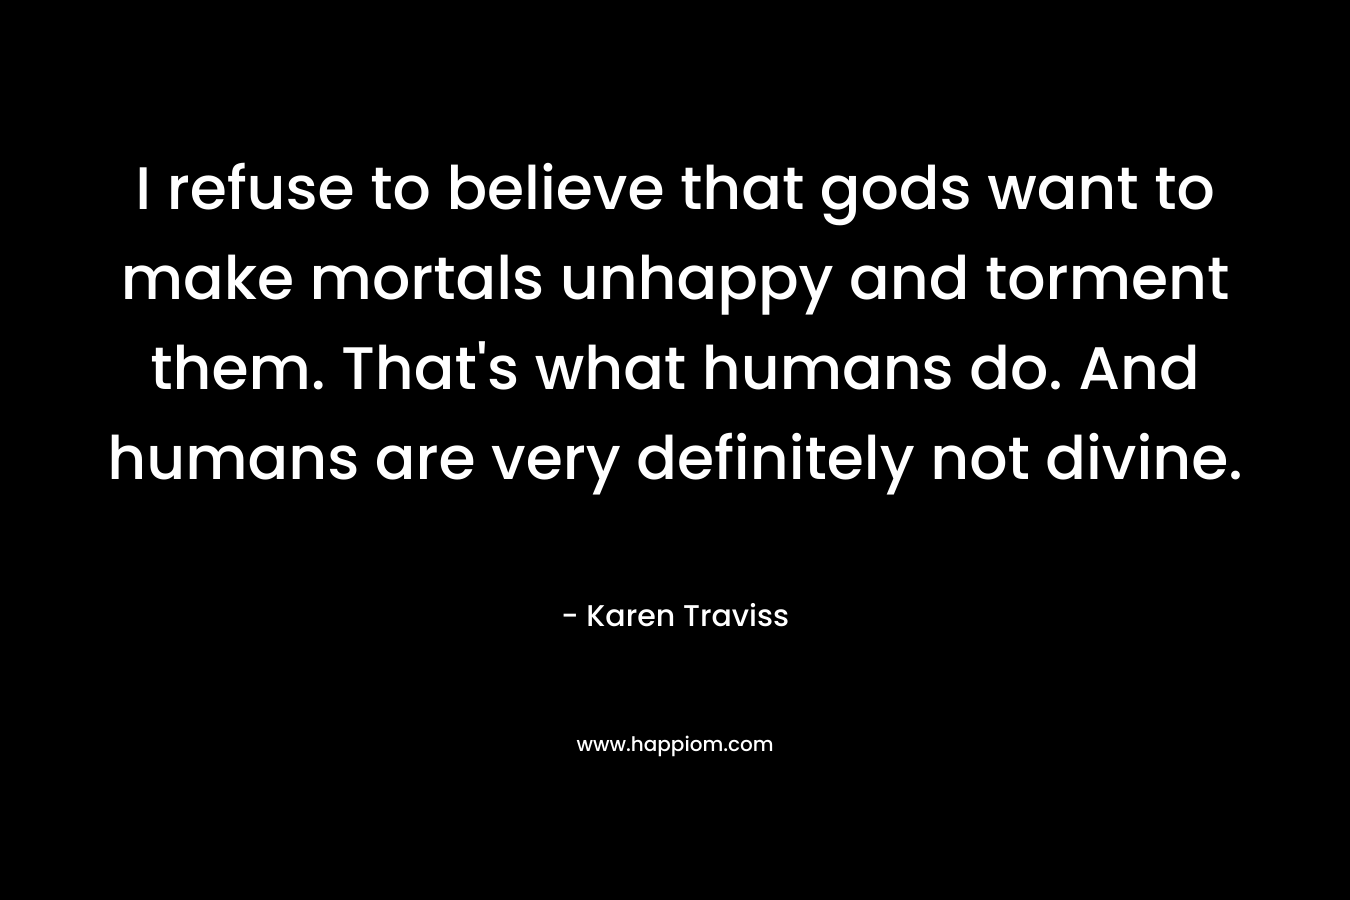 I refuse to believe that gods want to make mortals unhappy and torment them. That’s what humans do. And humans are very definitely not divine. – Karen Traviss